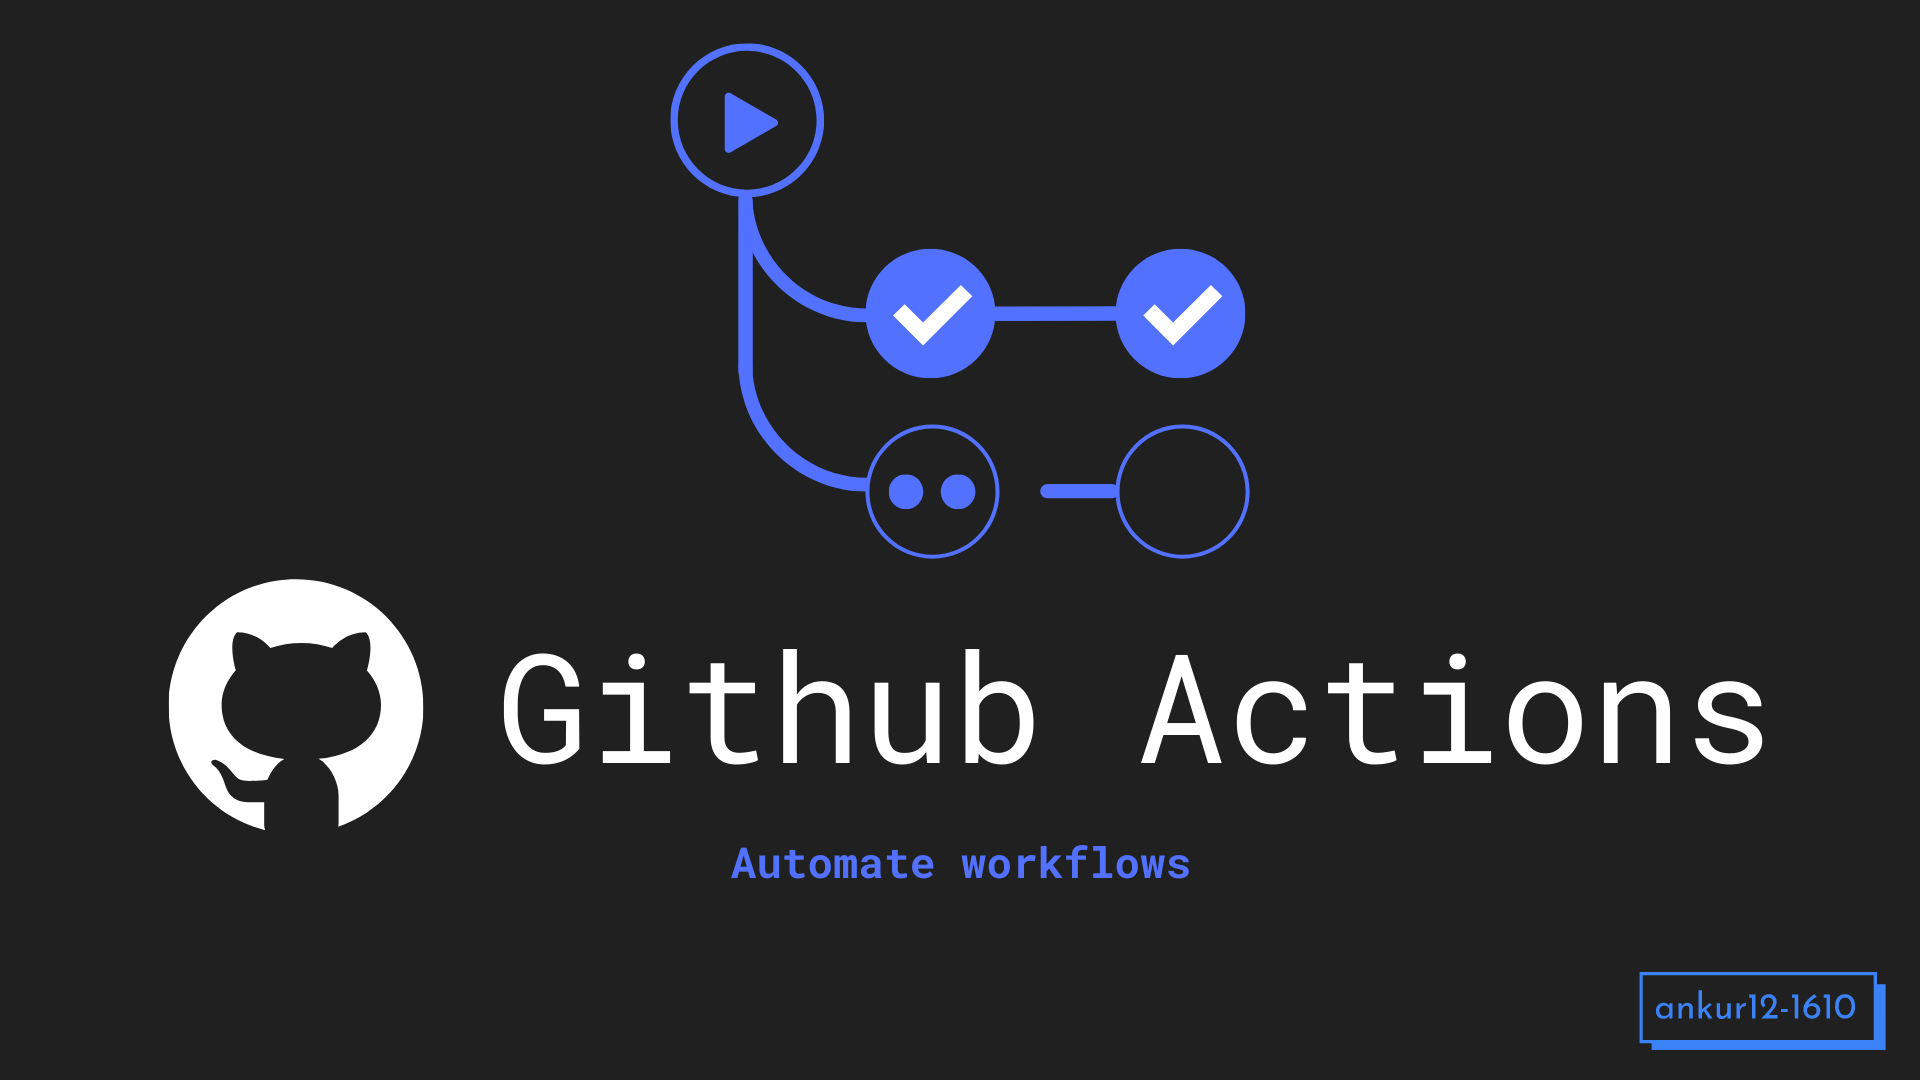 Build your own Github Action and publish to the Github Marketplace!